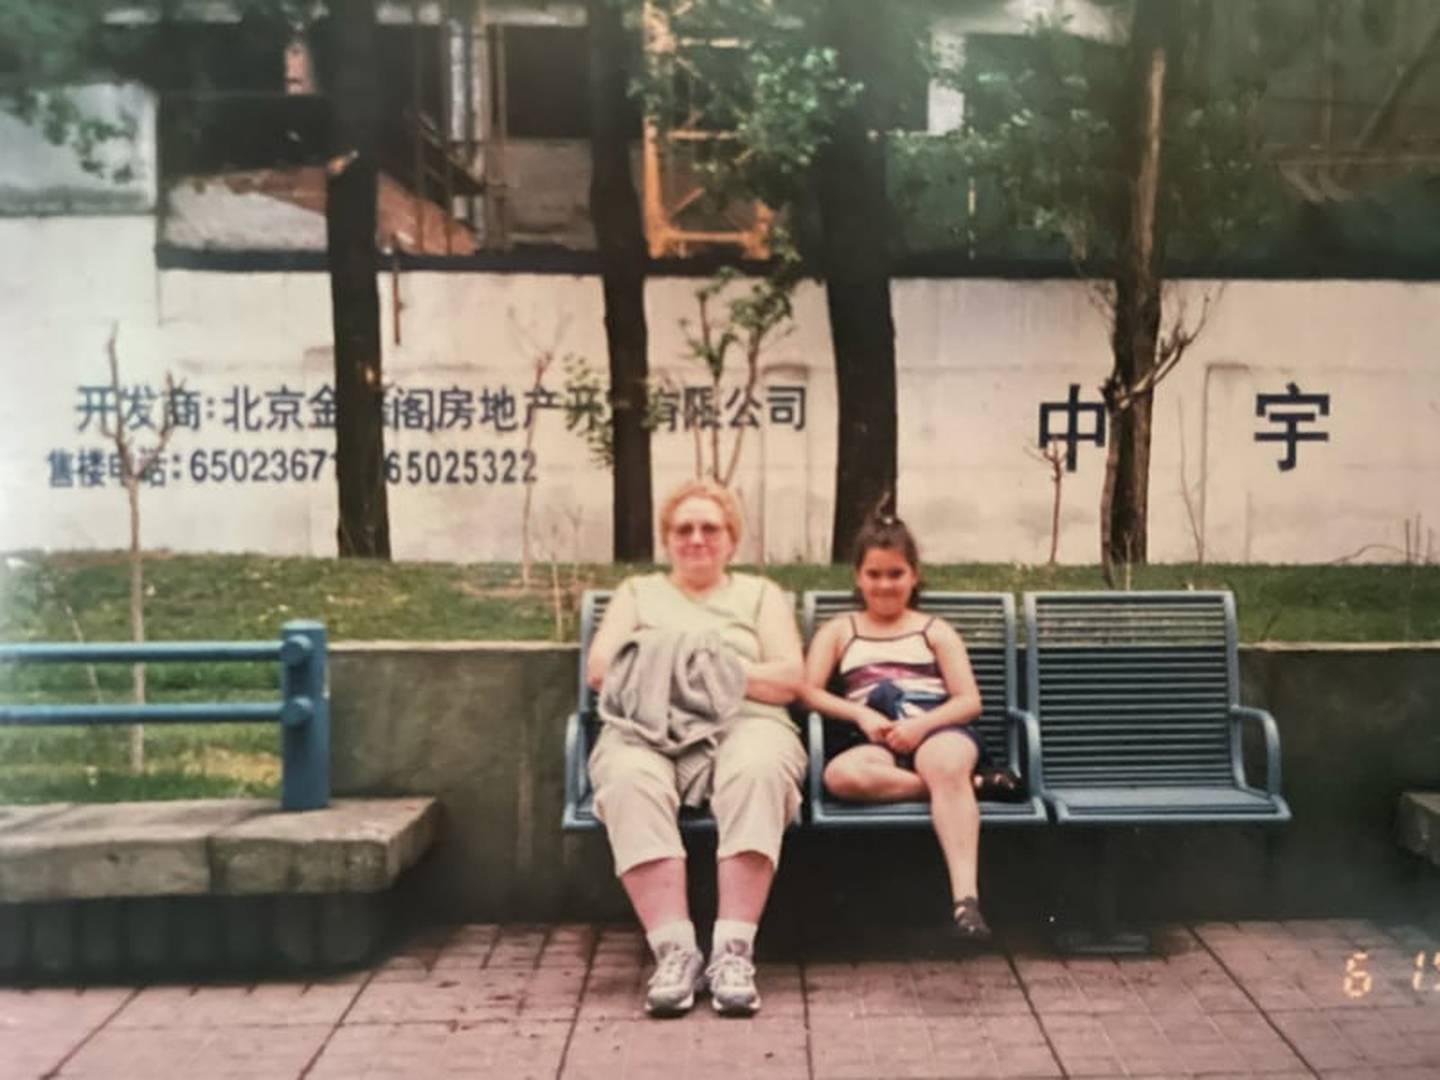 Former Joliet resident Carol Juricic is pictured with her daughter Sheila Juricic in 2001 at Beijing, China. Carol and her husband Paul cared for more than 250 foster children over 25 years. They also adopted four children.